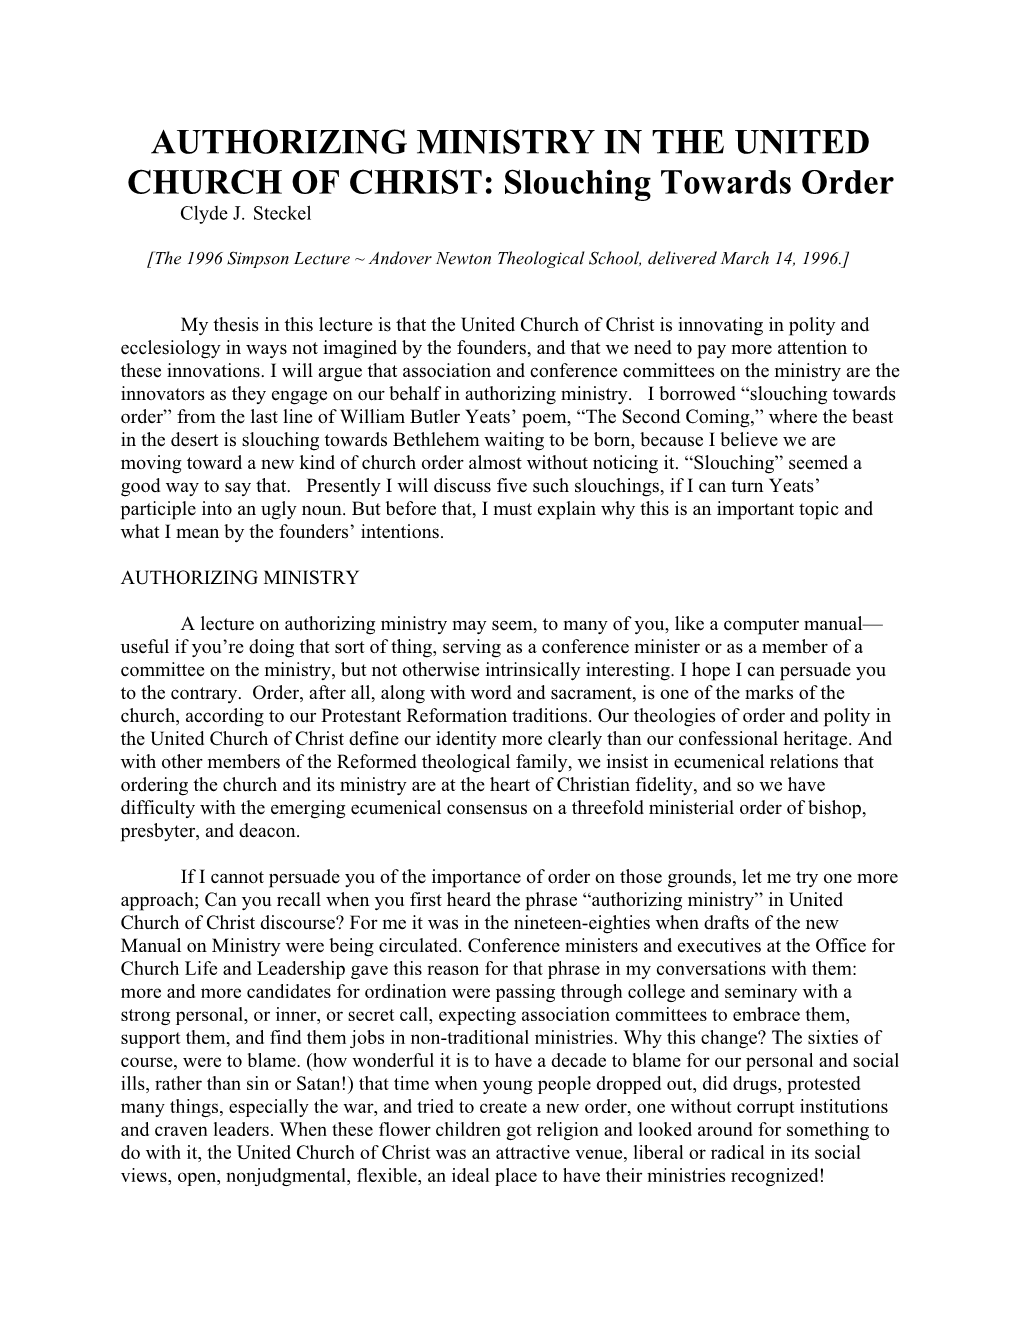 AUTHORIZING MINISTRY in the UNITED CHURCH of CHRIST: Slouching Towards Order Clyde J